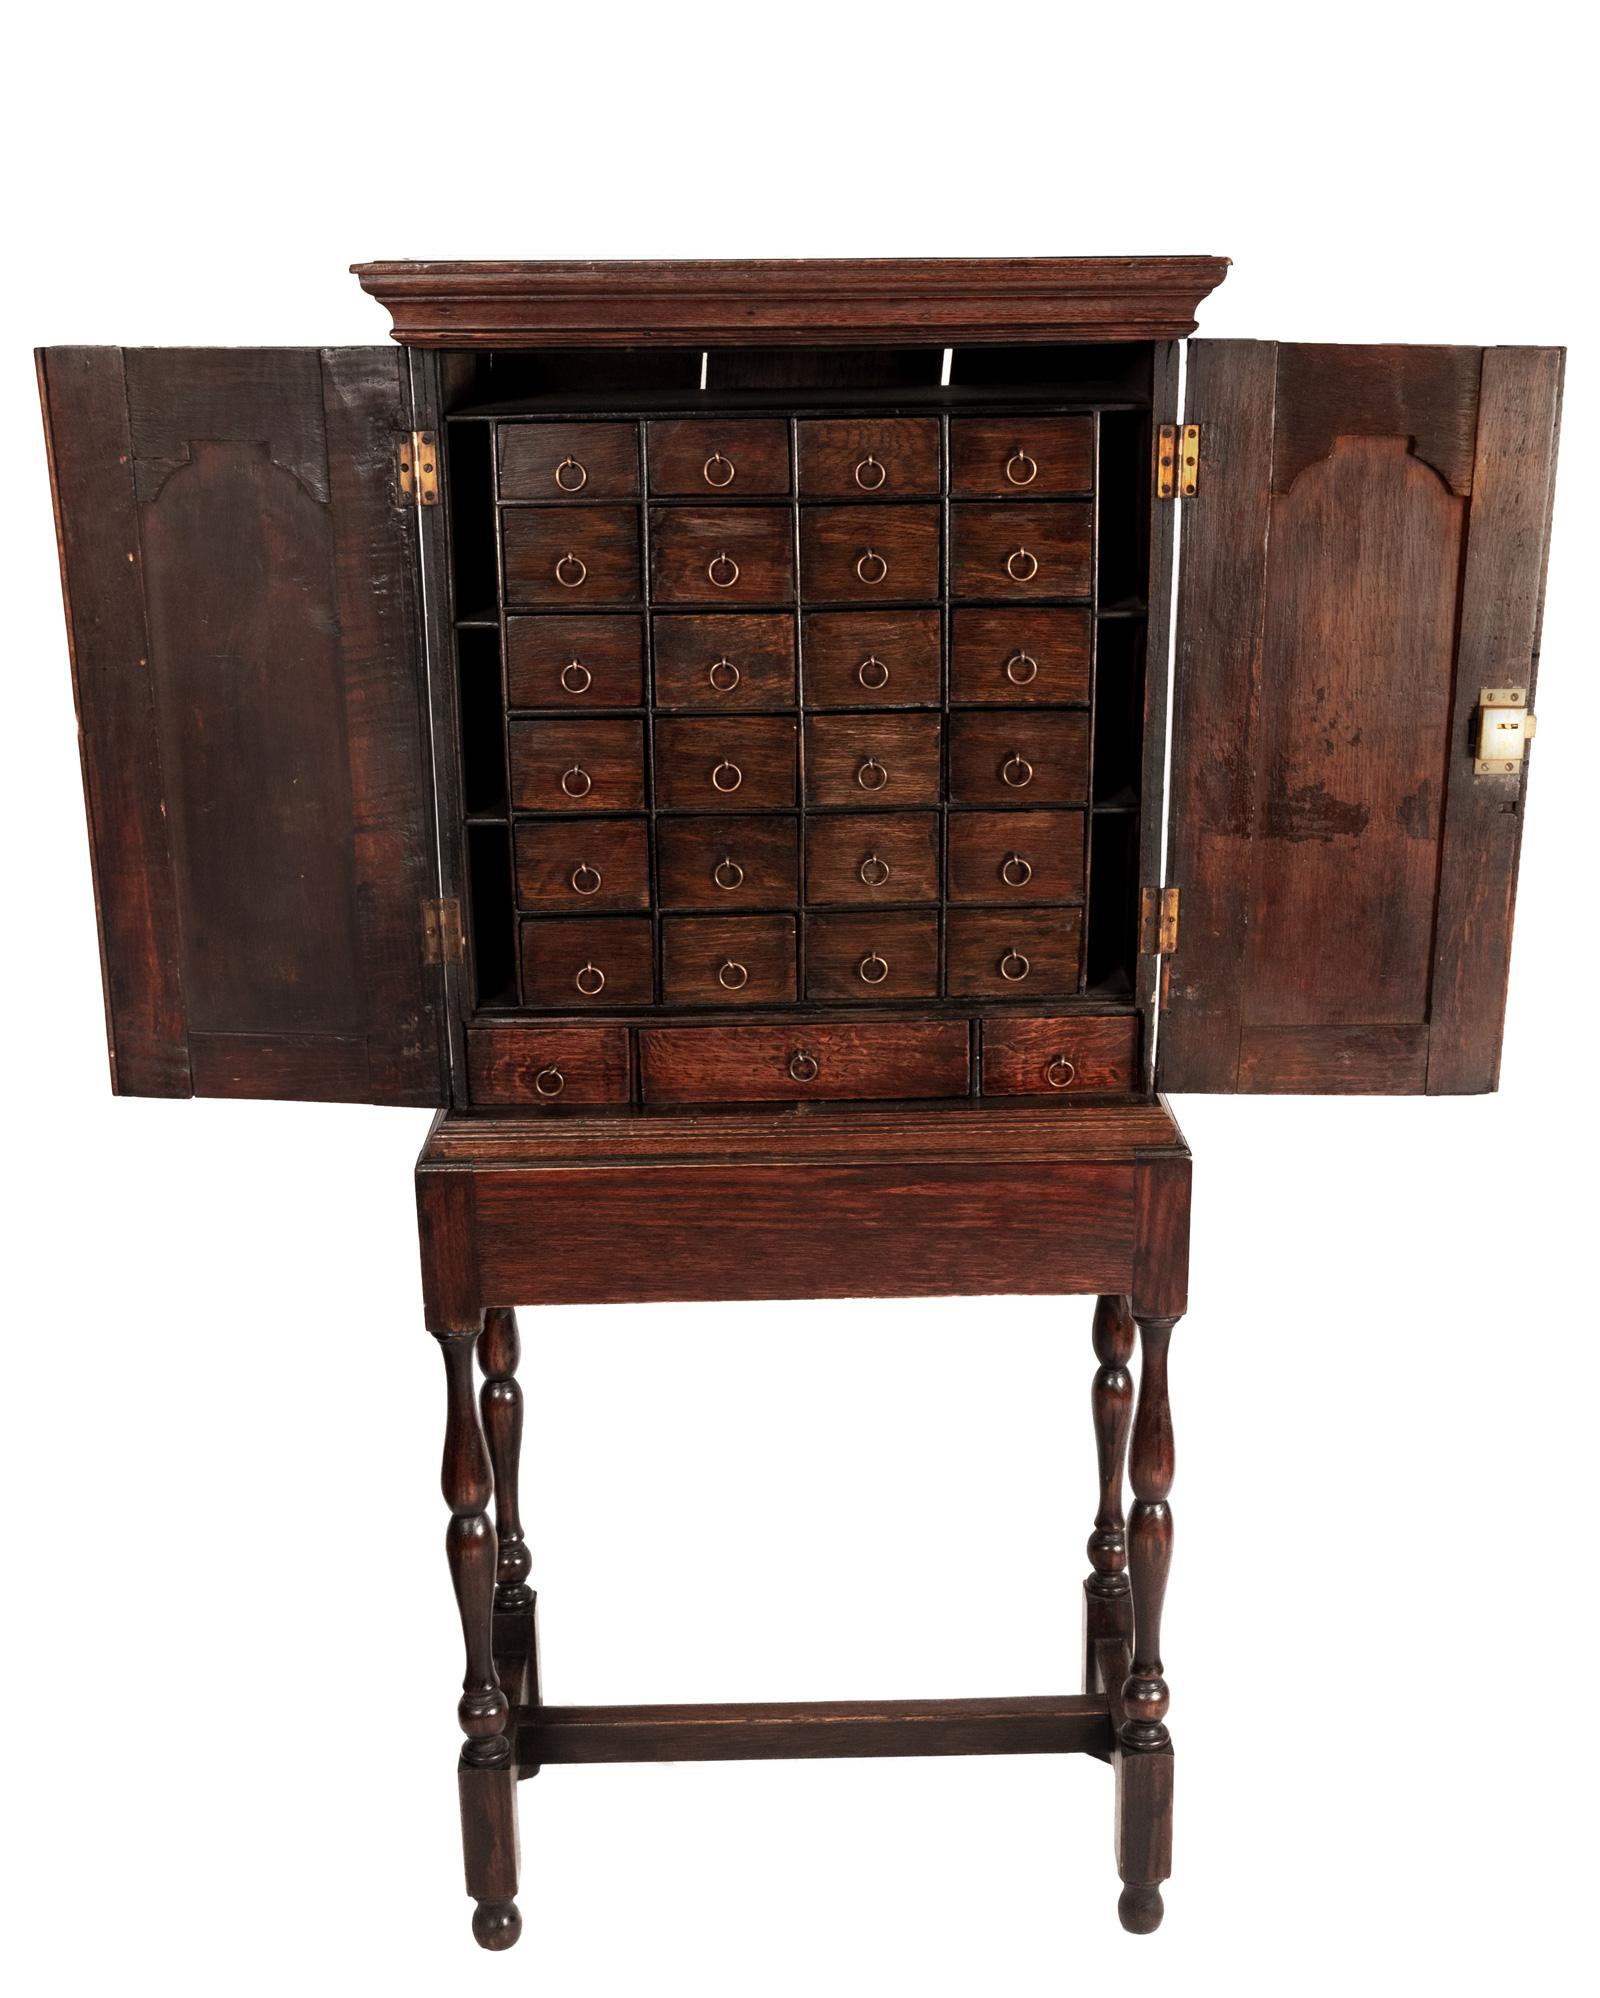 An 18th century English oak apothecary cabinet on stand.